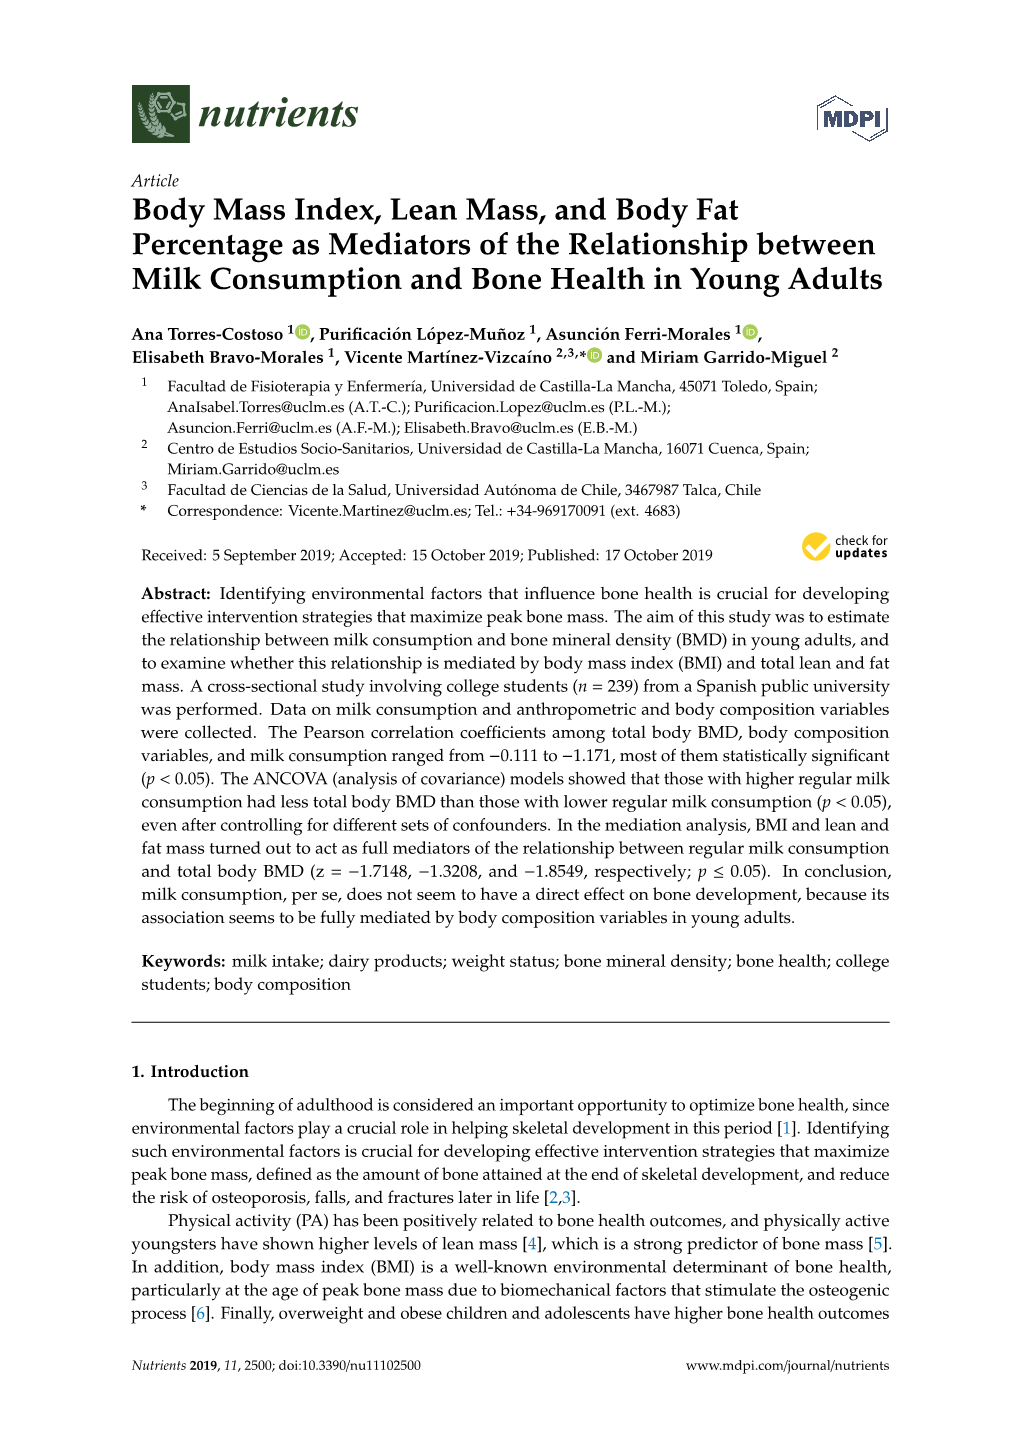 Body Mass Index, Lean Mass, and Body Fat Percentage As Mediators of the Relationship Between Milk Consumption and Bone Health in Young Adults